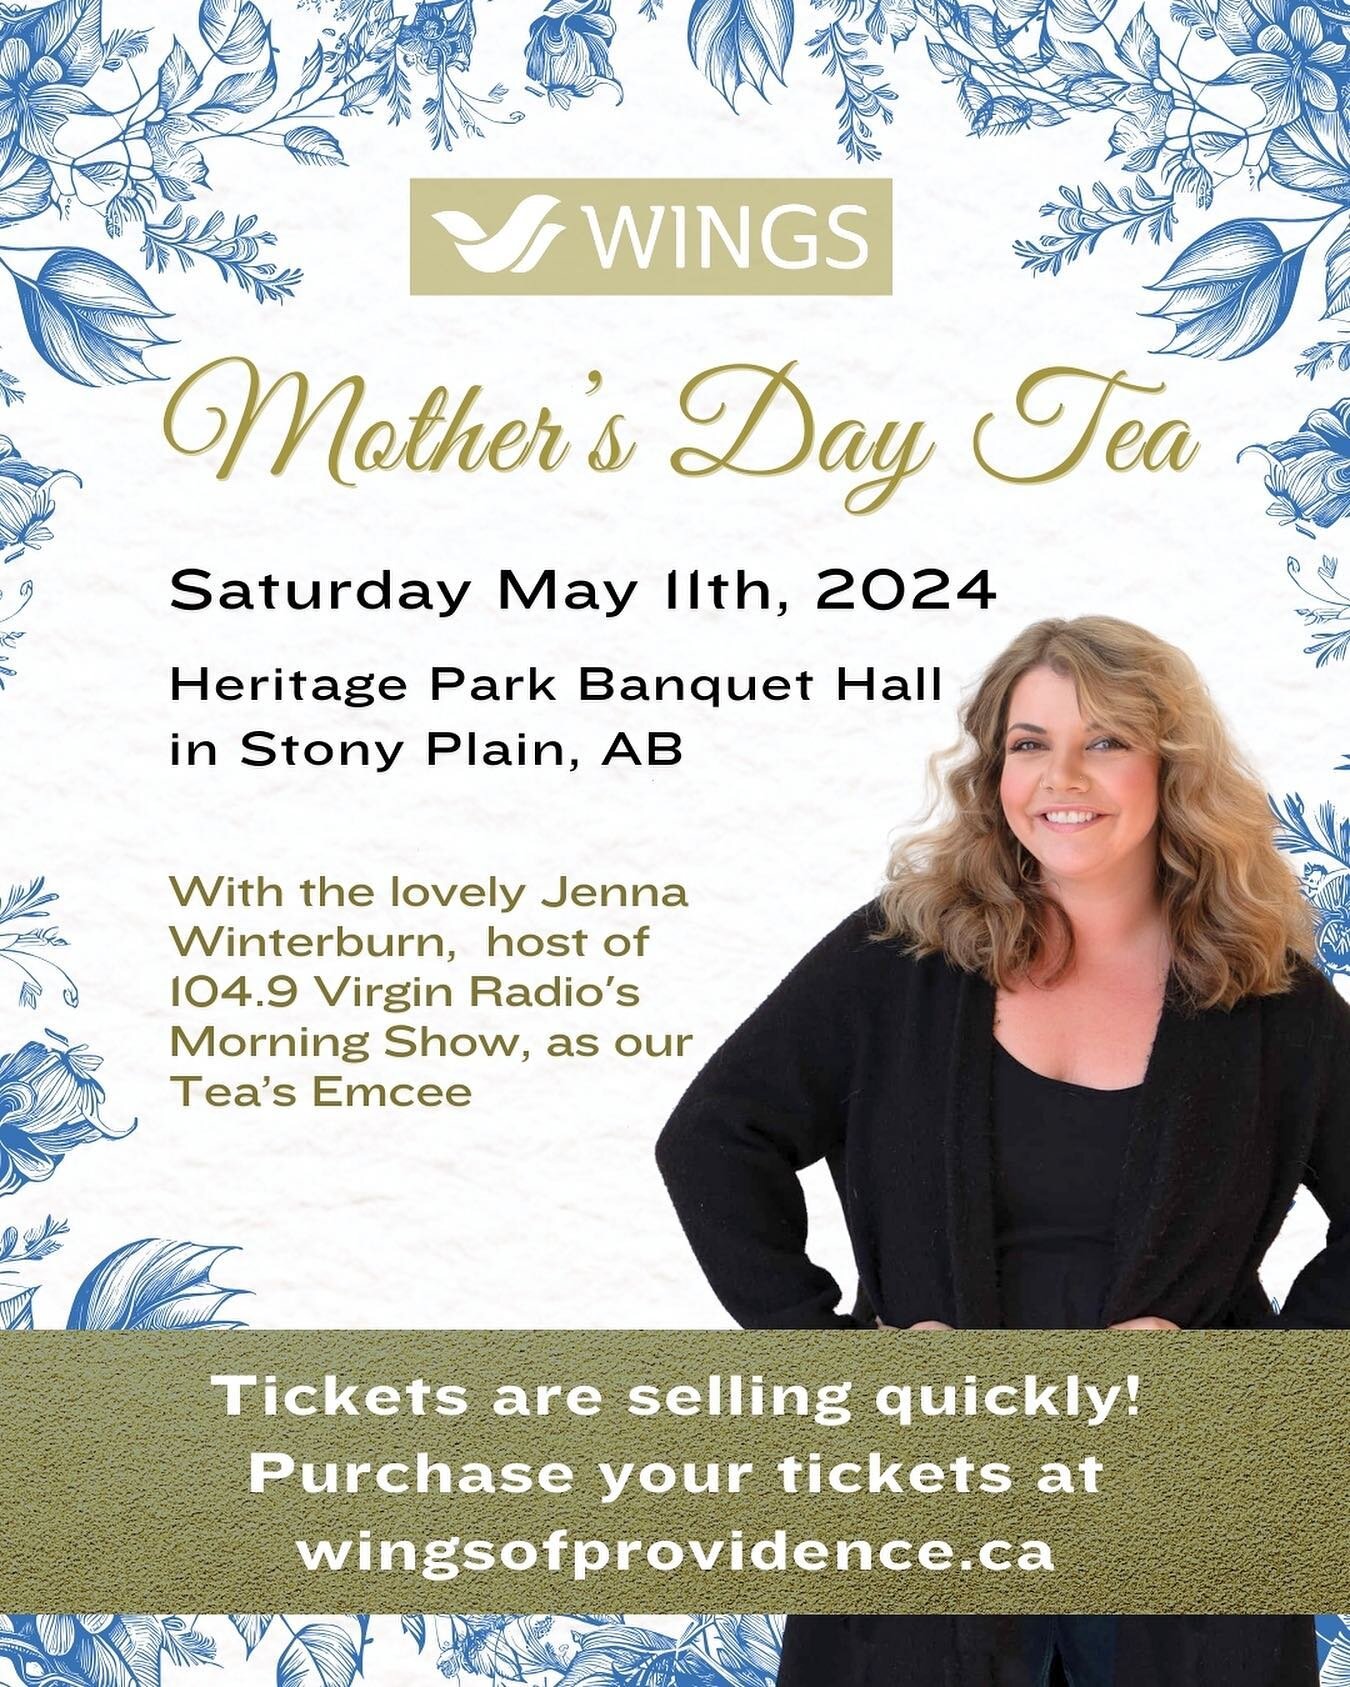 Have you purchased your tickets to the Mother&rsquo;s Day Tea? Hurry, as time is running out!  Purchase your tickets online at www.wingsofprovidence.ca  Tickets are selling quickly!

Join us for afternoon tea and light refreshments in the beautiful b